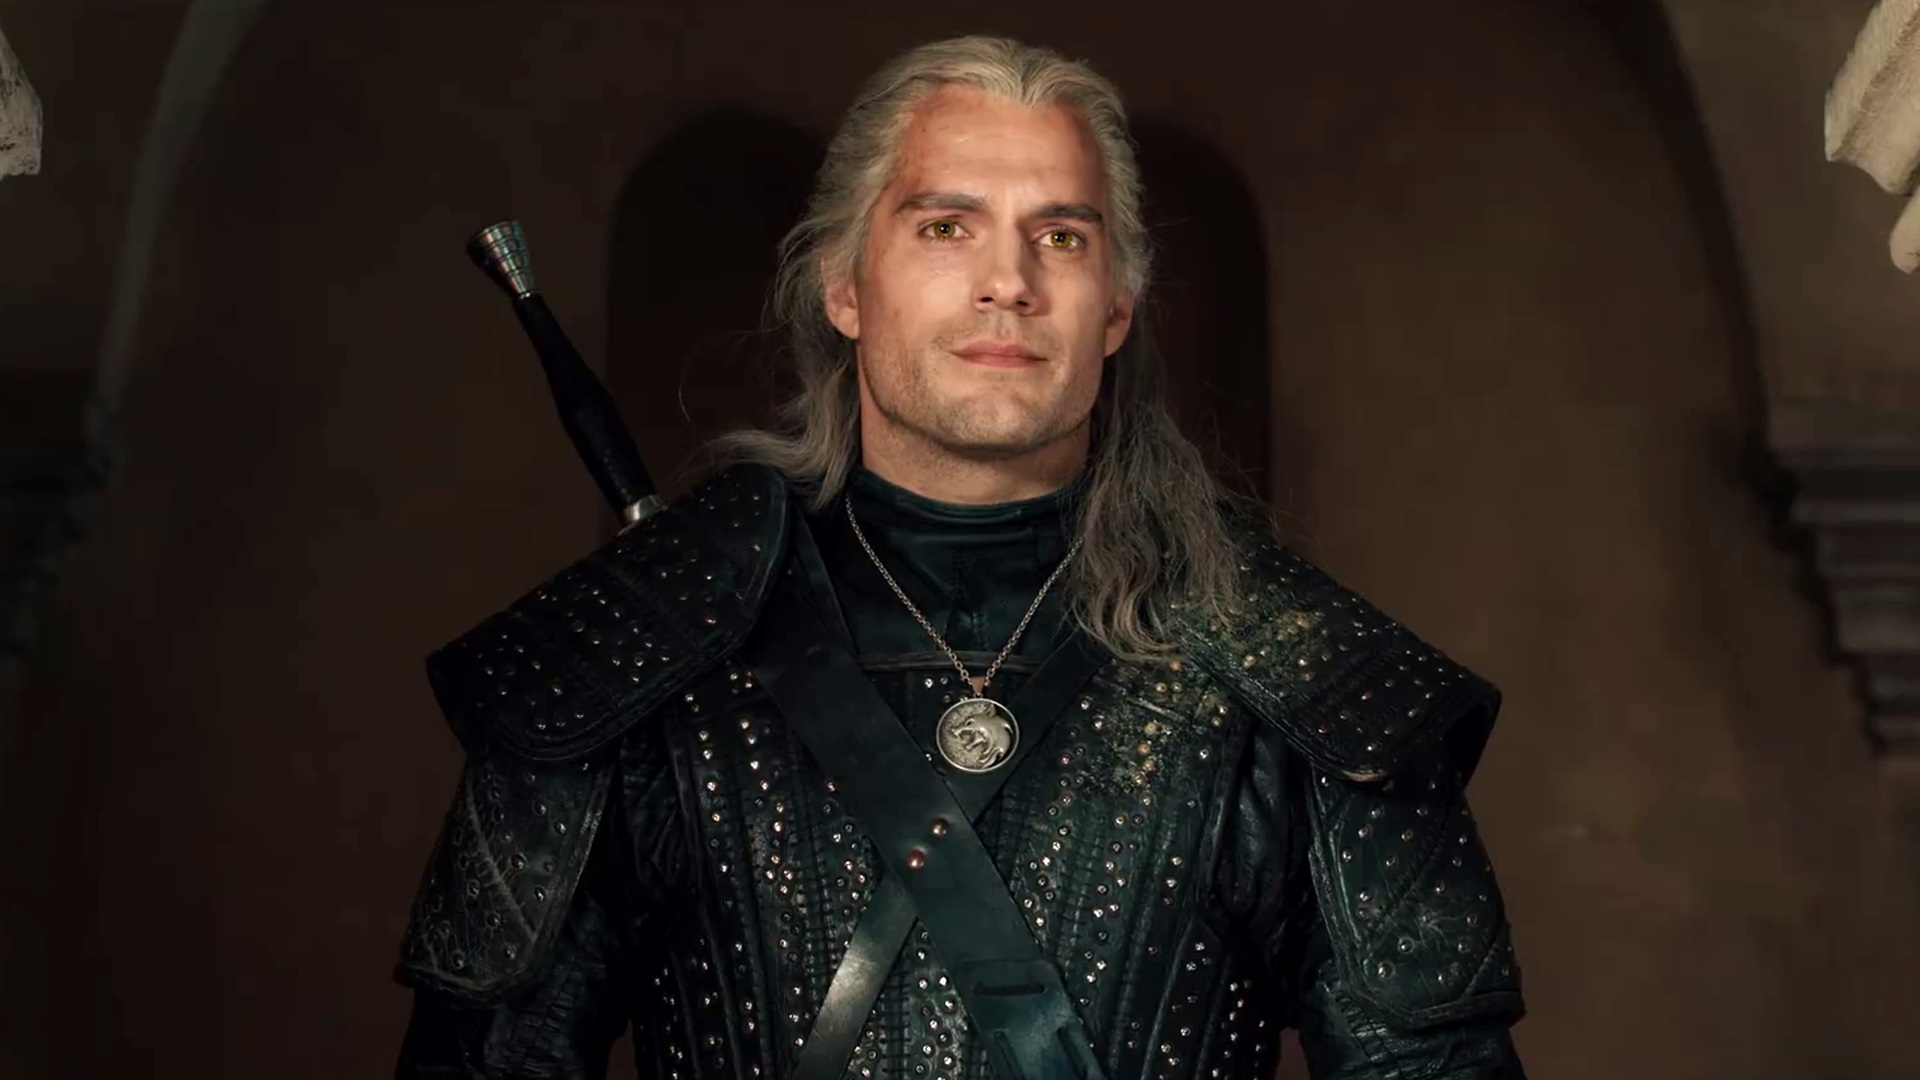 The Witcher Season 2 Release Date Cast And Everything You Need